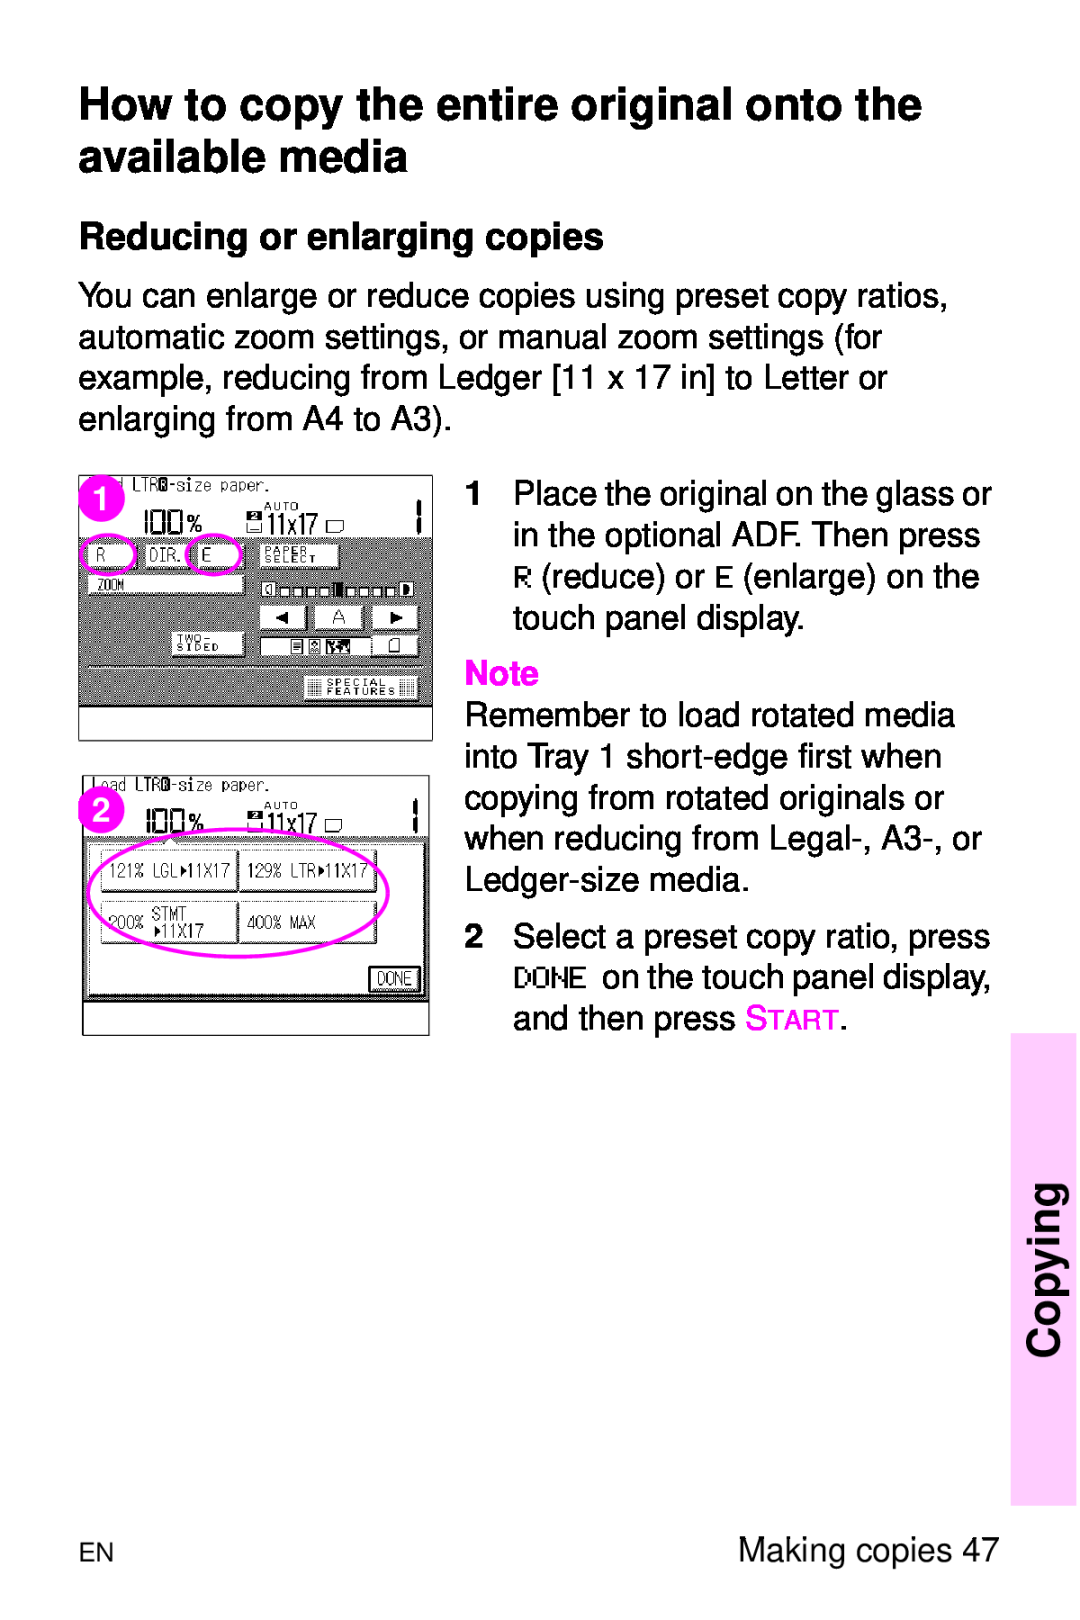 HP 8000 s manual How to copy the entire original onto the available media, Reducing or enlarging copies, Copying 